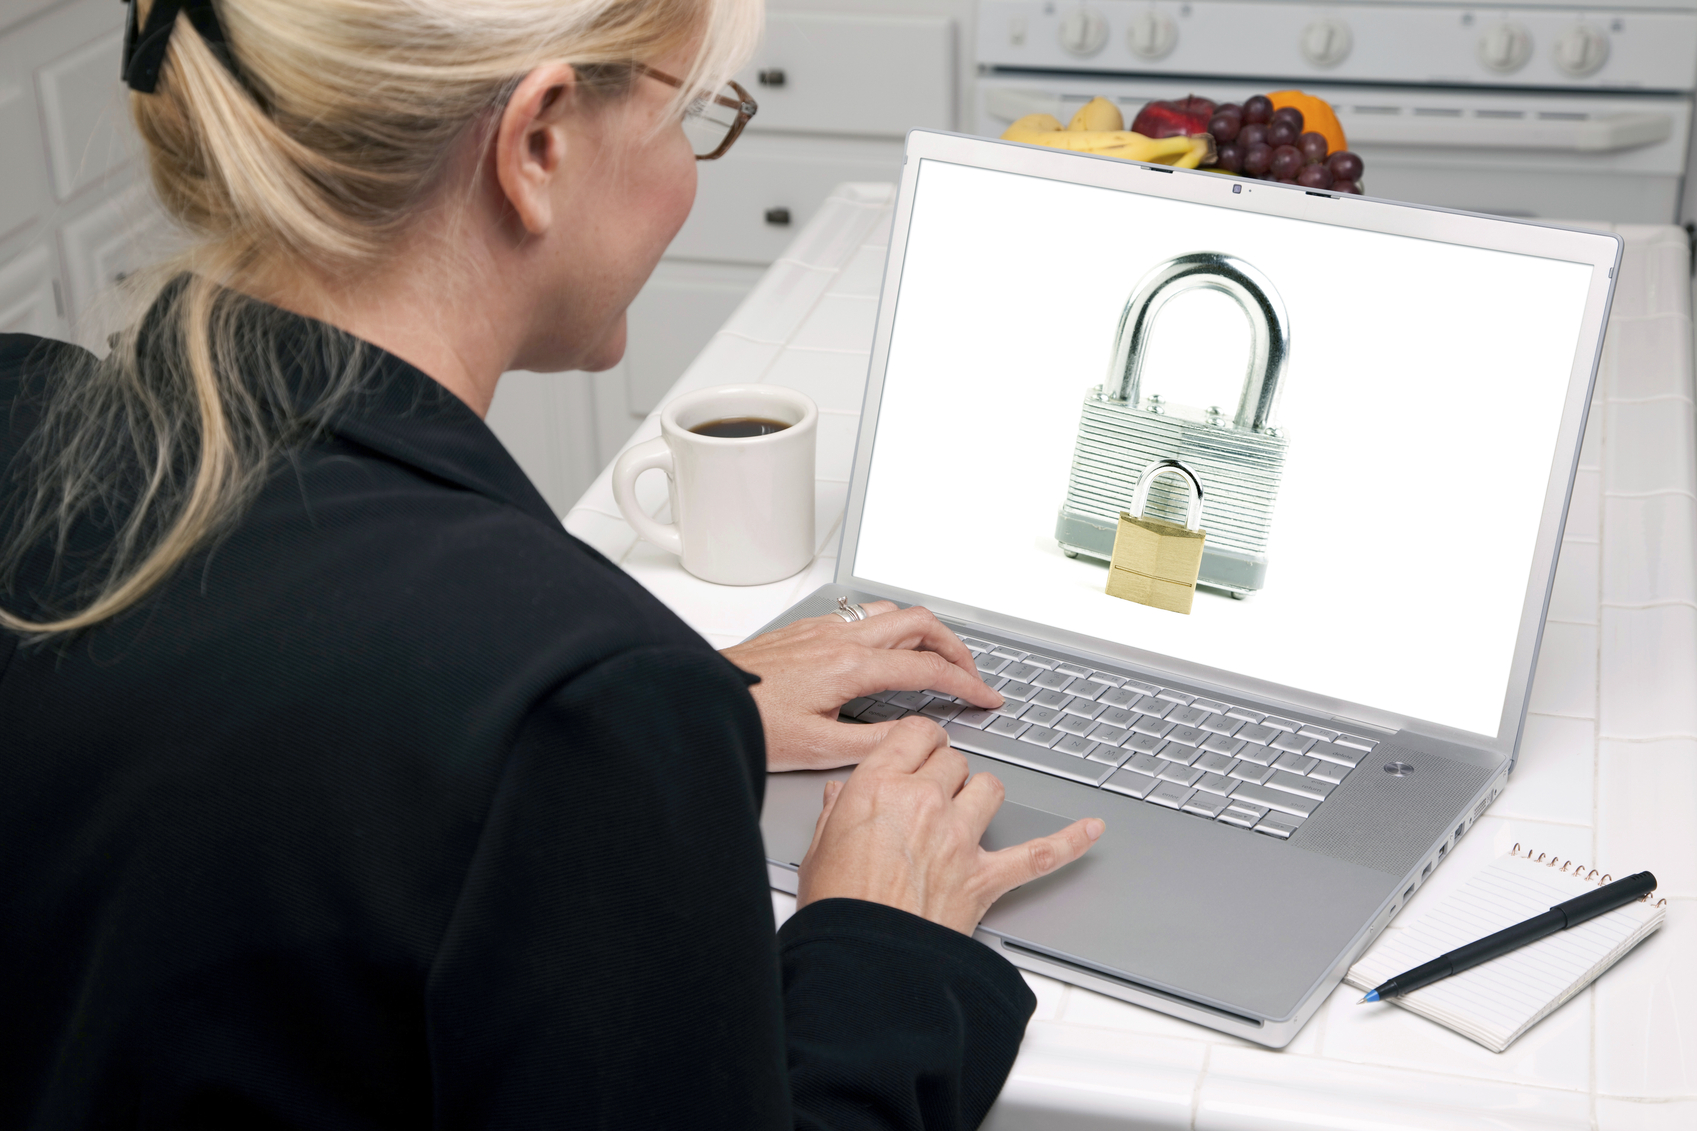 Woman In Kitchen Using Laptop - Security